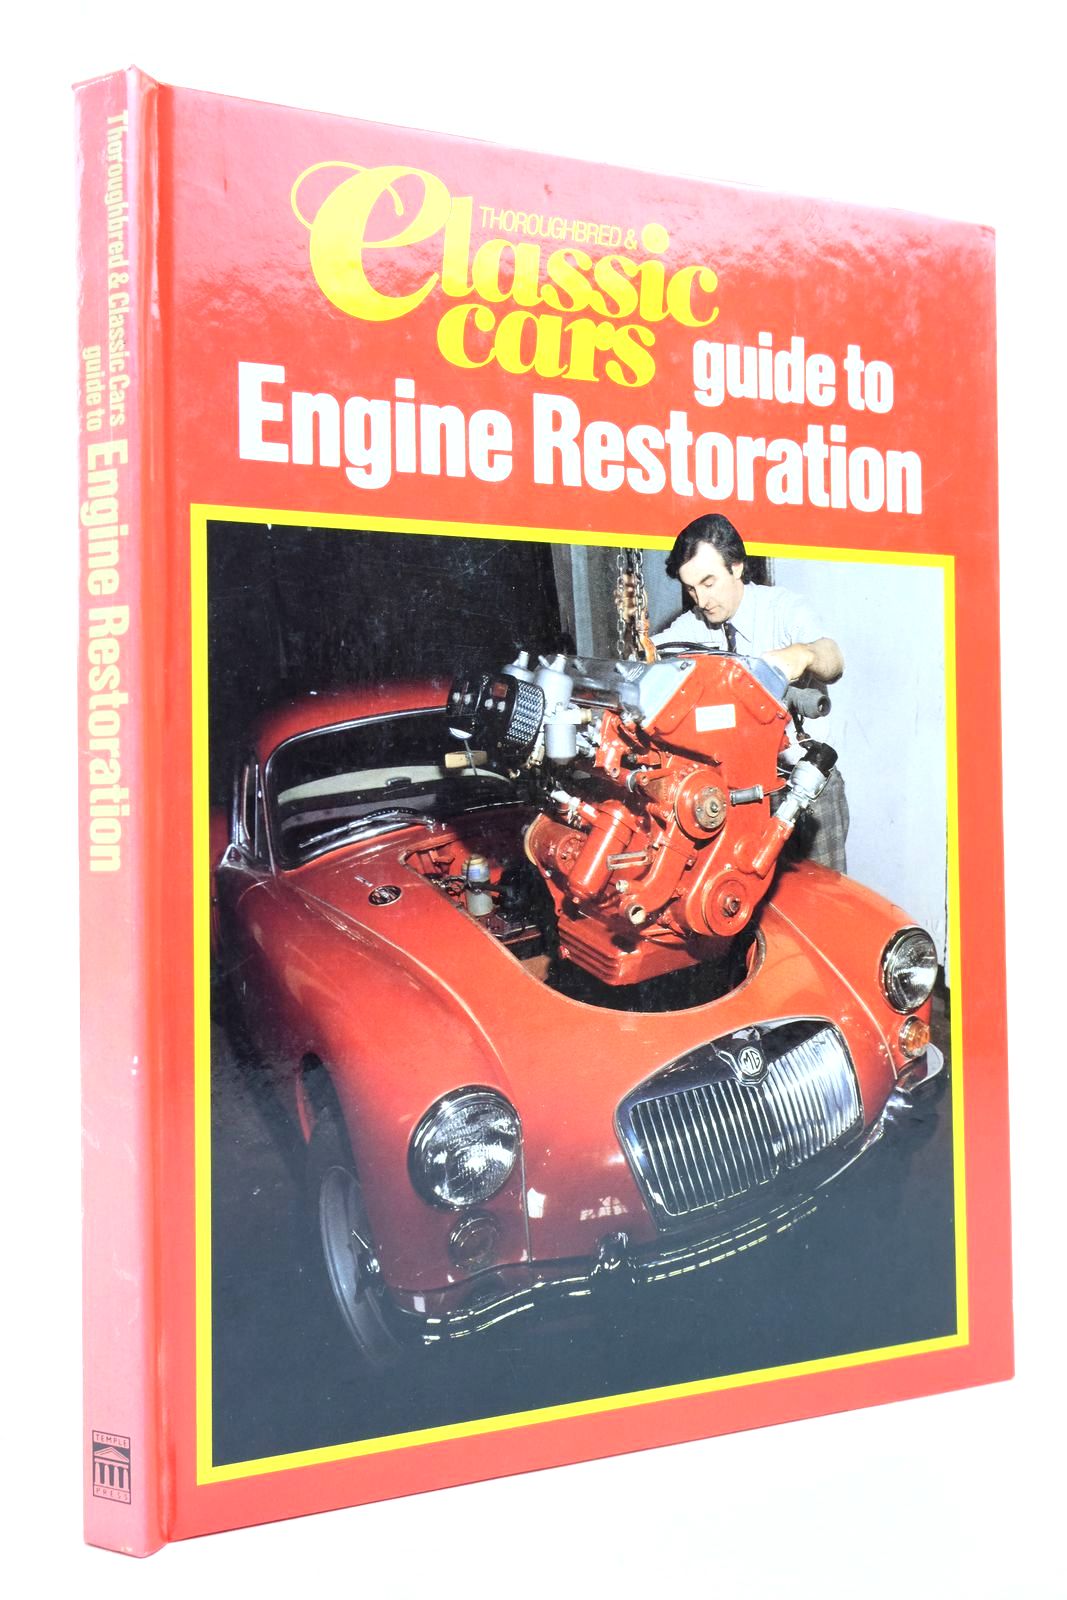 Photo of THOROUGHBRED & CLASSIC CARS GUIDE TO ENGINE RESTORATION published by Temple Press (STOCK CODE: 2139552)  for sale by Stella & Rose's Books